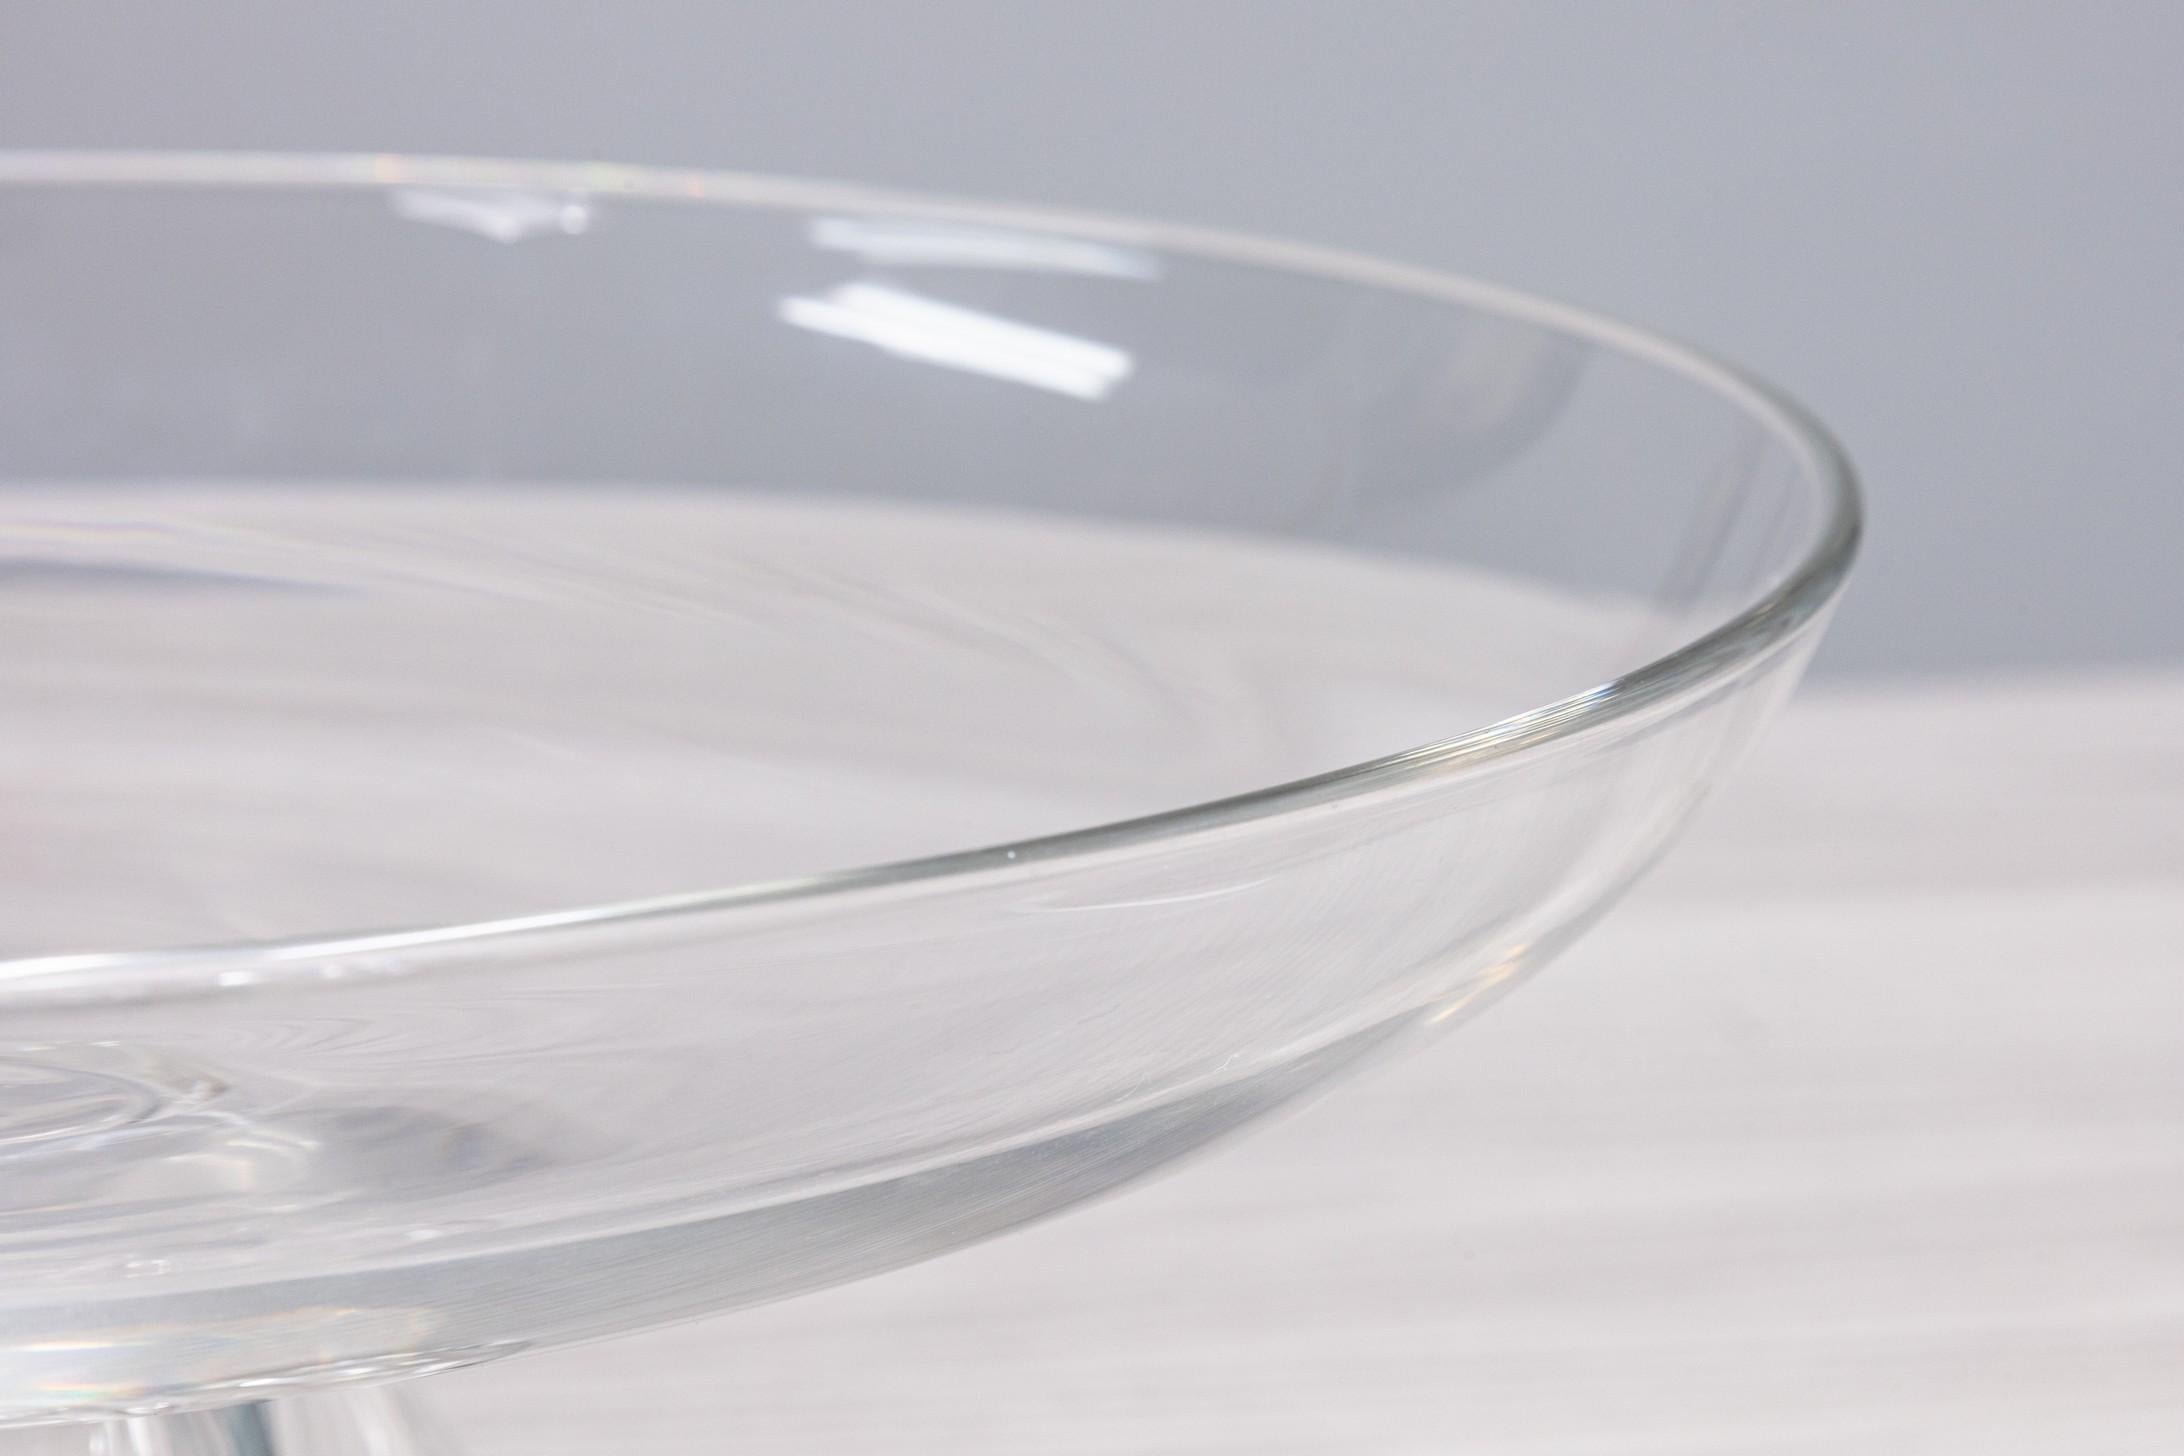 An incredible centerpiece bowl from Steuben glass in 1960. This piece features a wide shallow bowl with a heavy base featuring four teardrops falling down the pedestal. This piece is signed on the bottom. It measures 5.5 in tall, and has a 13.25 in